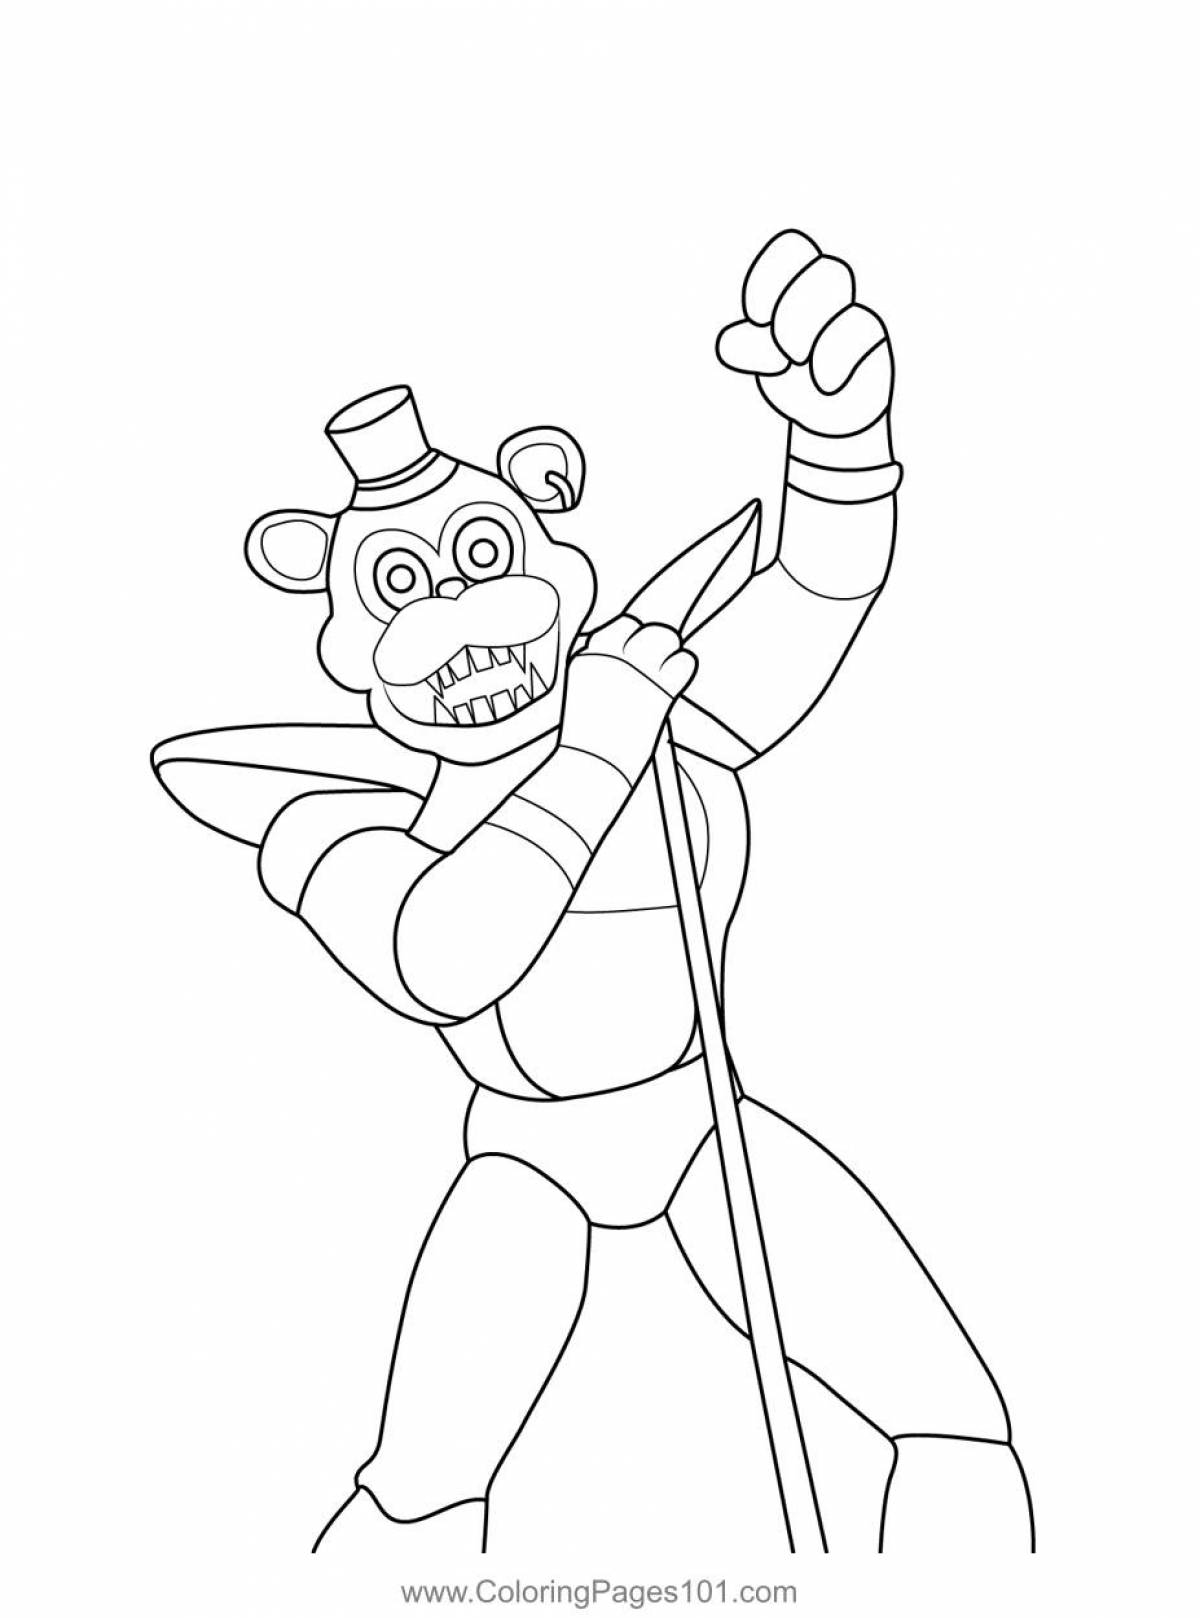 Glorious freddy coloring